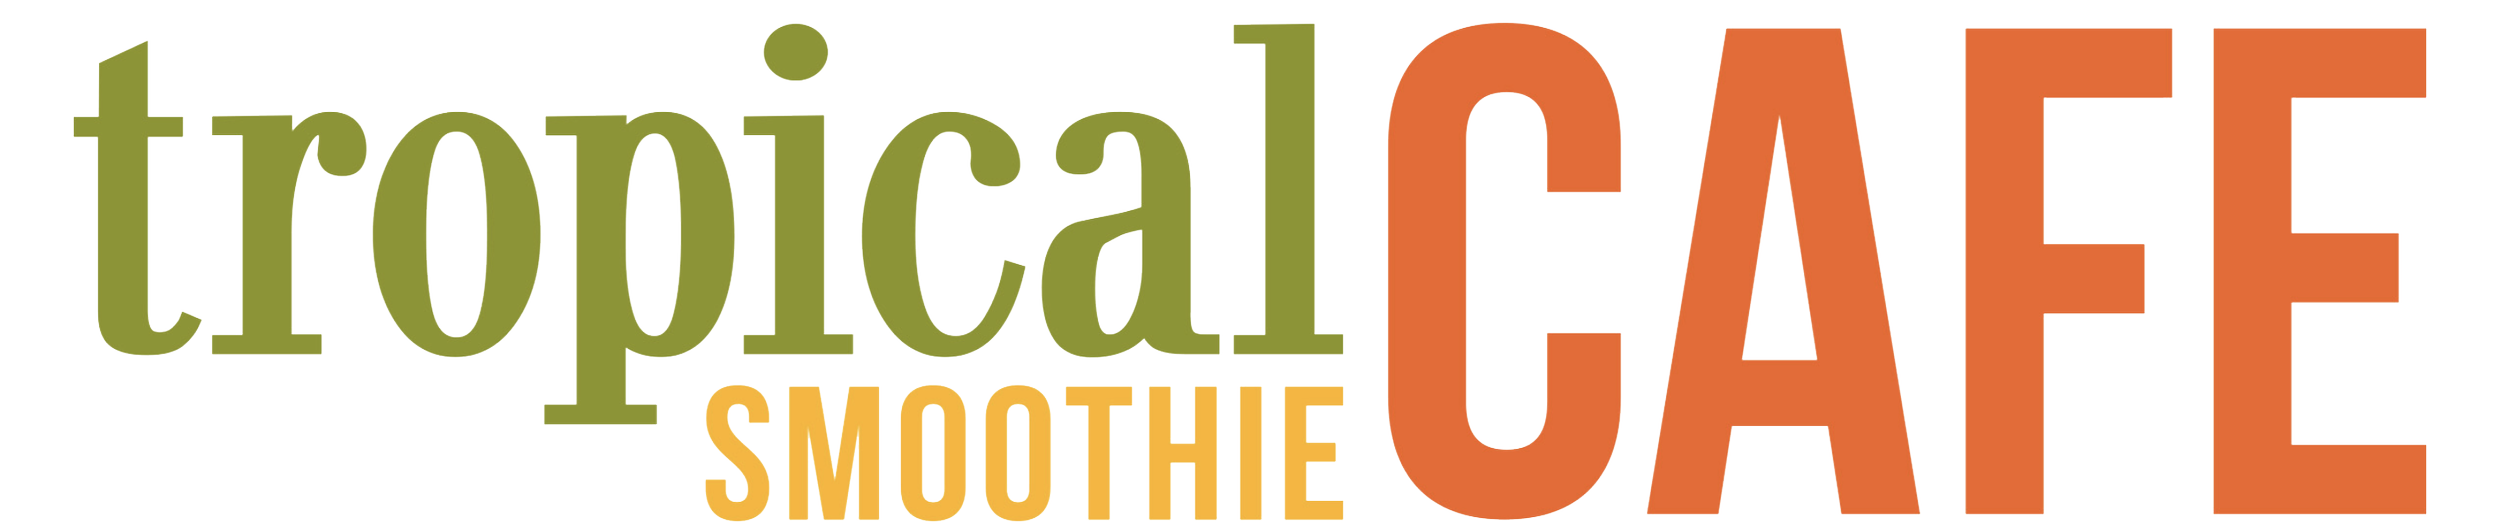 Tropical Smoothie Logo.png